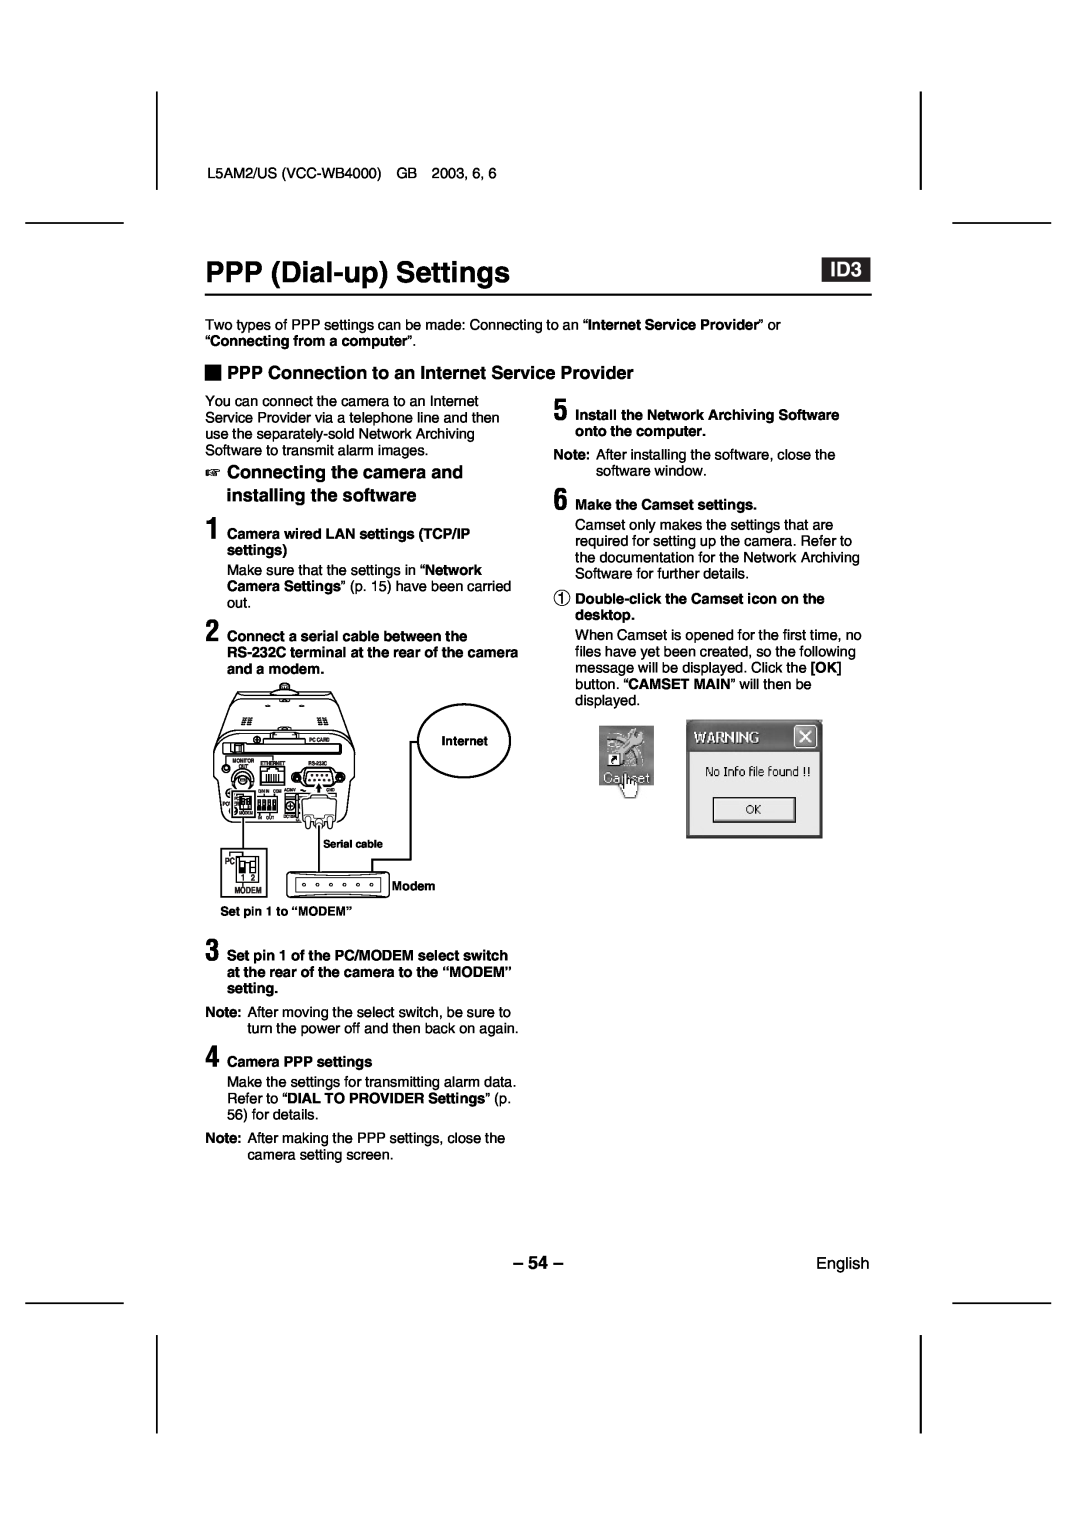 Sanyo VCC-WB4000 PPP Dial-up Settings, PPP Connection to an Internet Service Provider, Make the Camset settings 